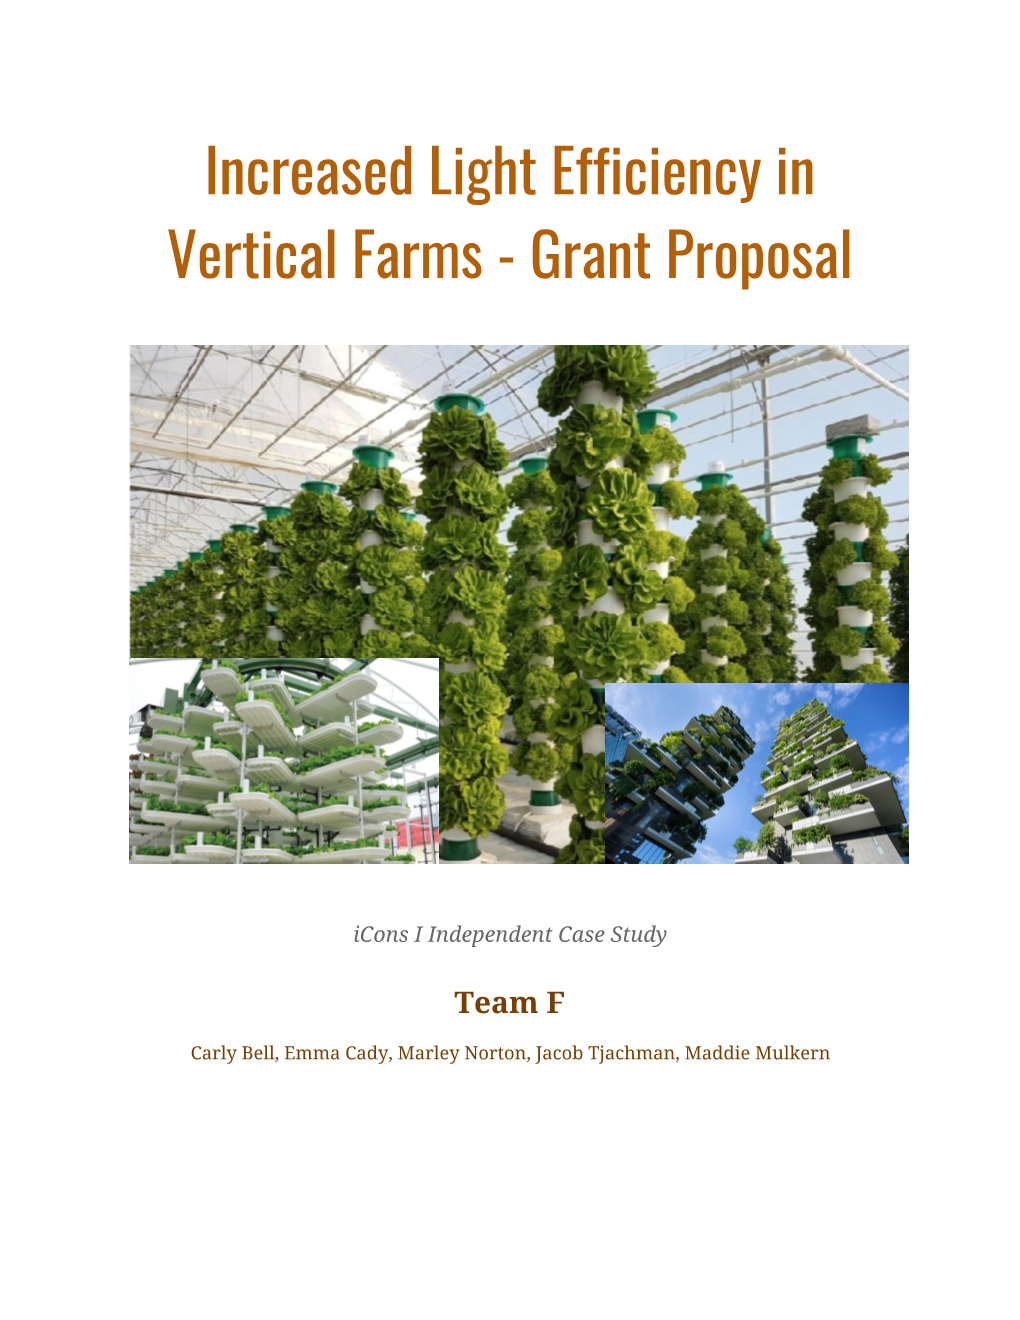 Increased Light Efficiency in Vertical Farms - Grant Proposal